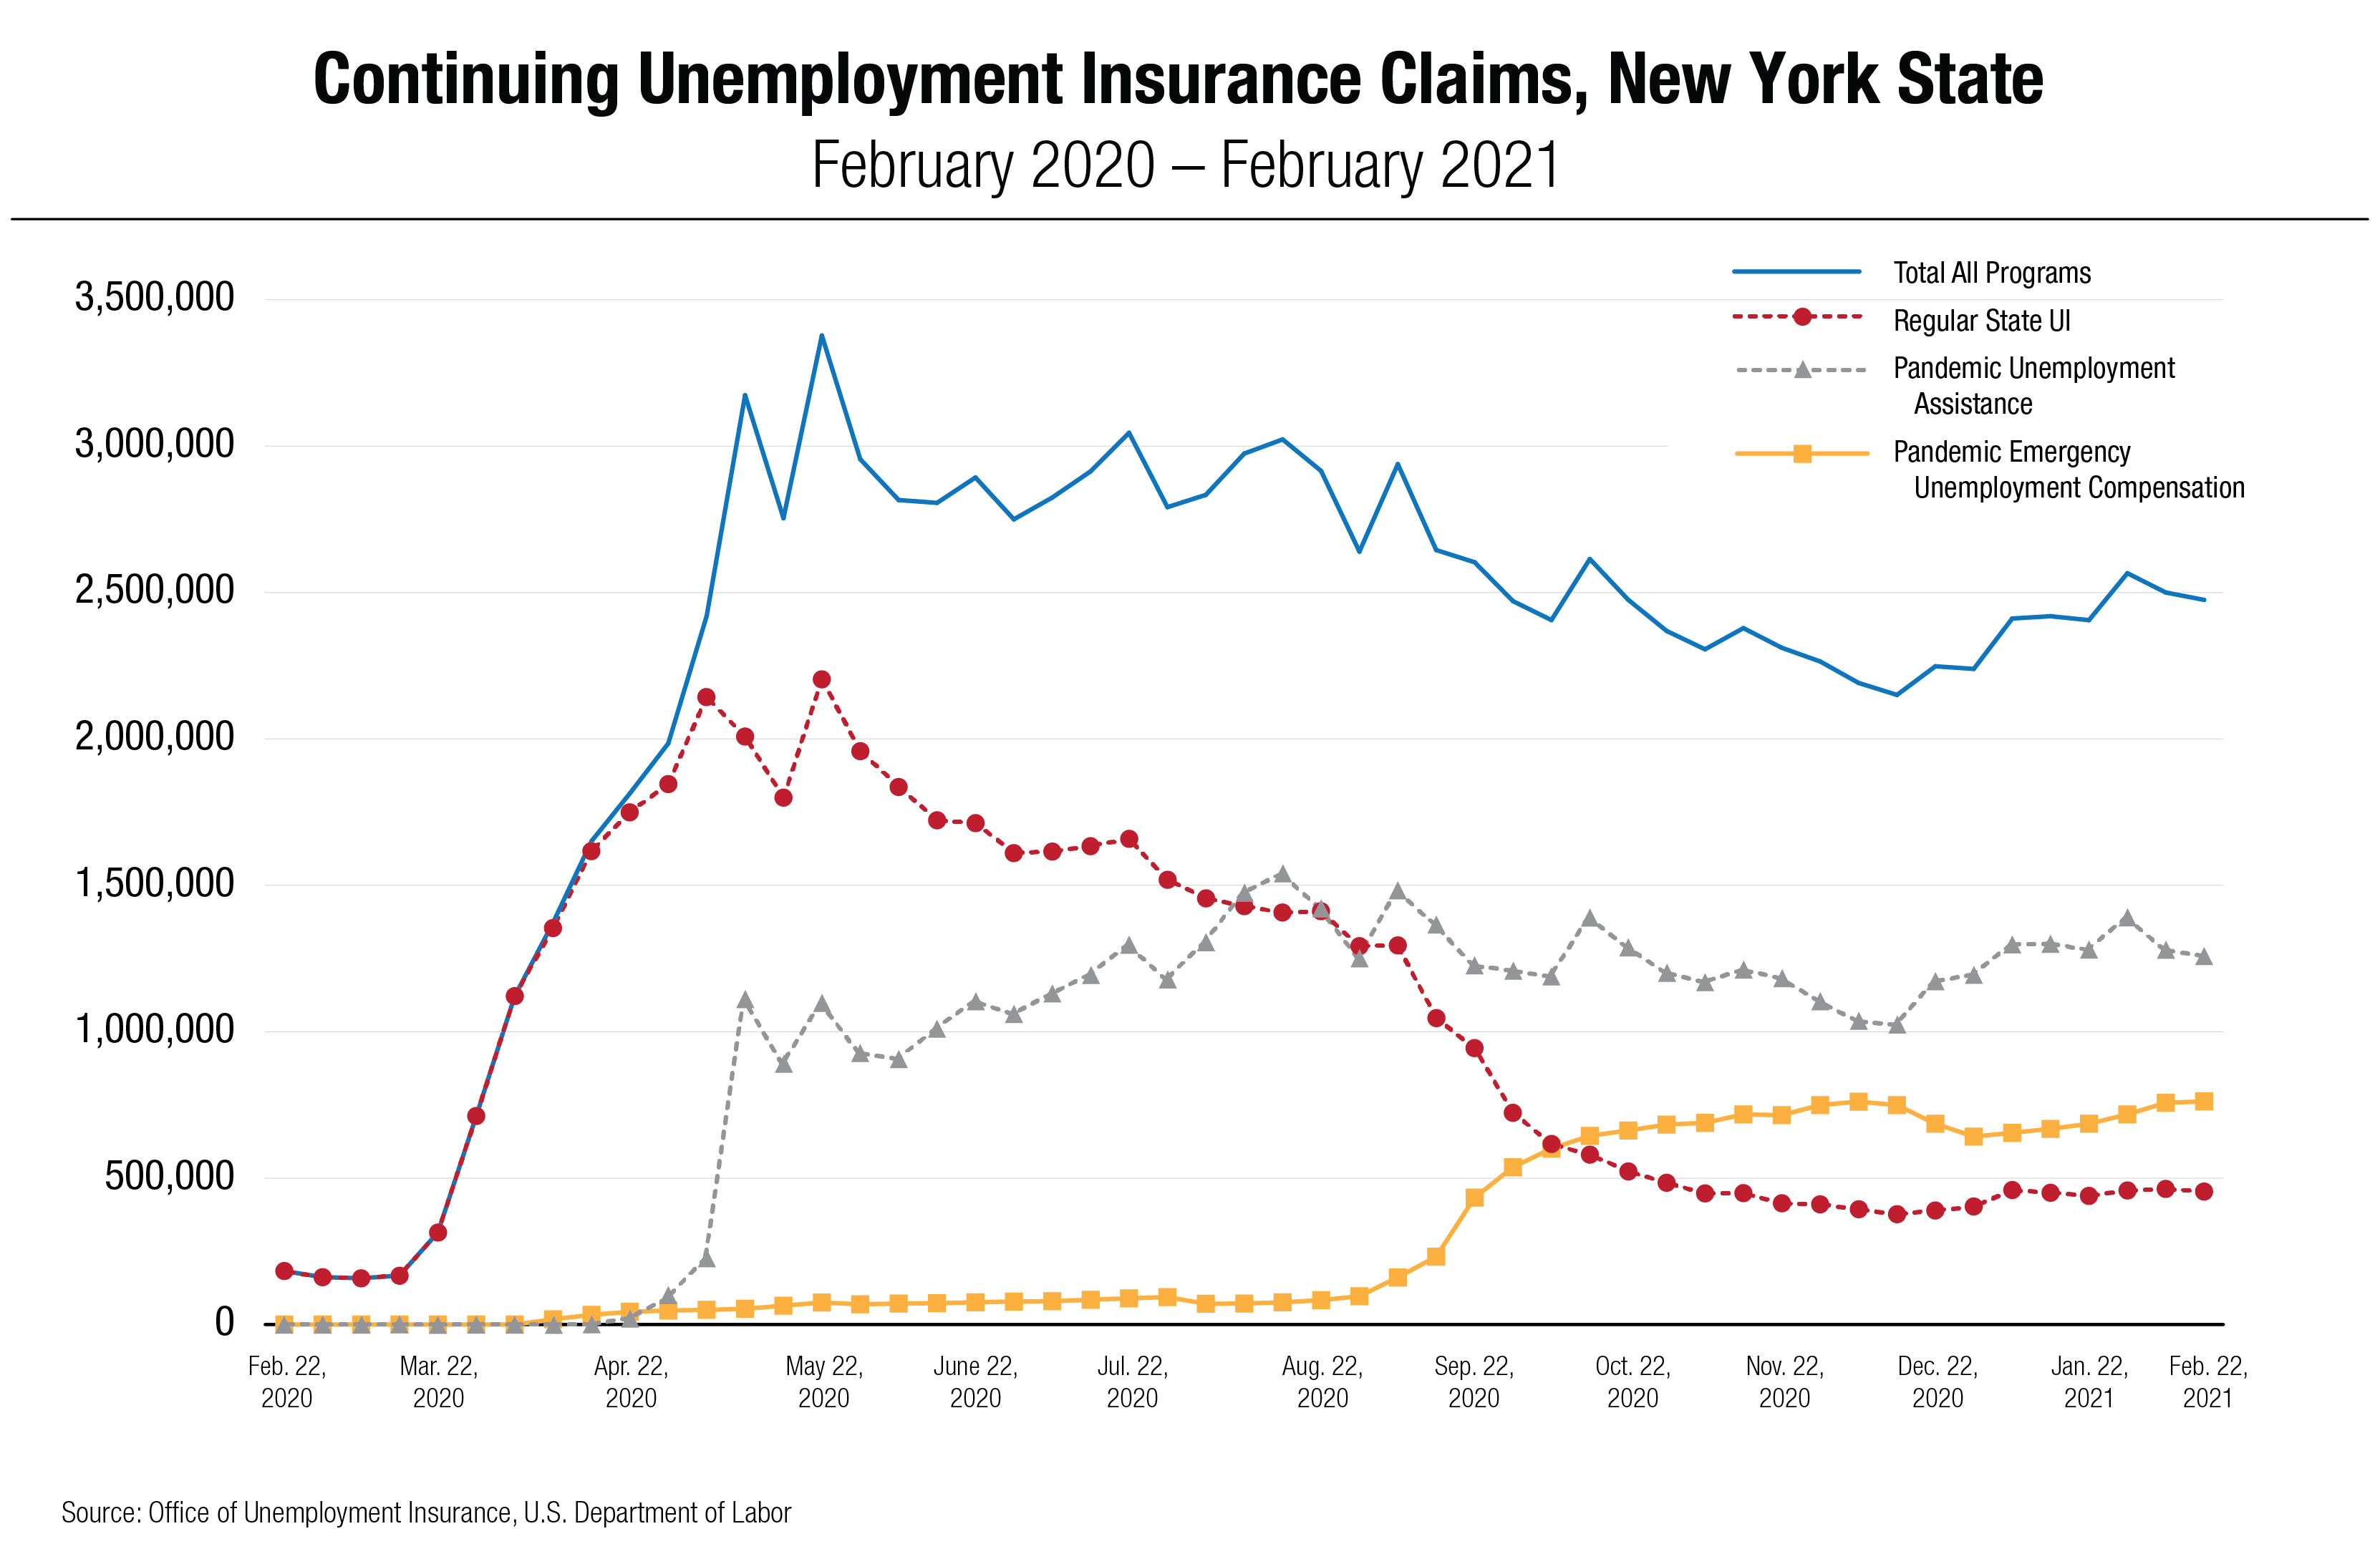 Continuing Unemployment Insurance Claims, New York State, (February 2020 - February 2021)